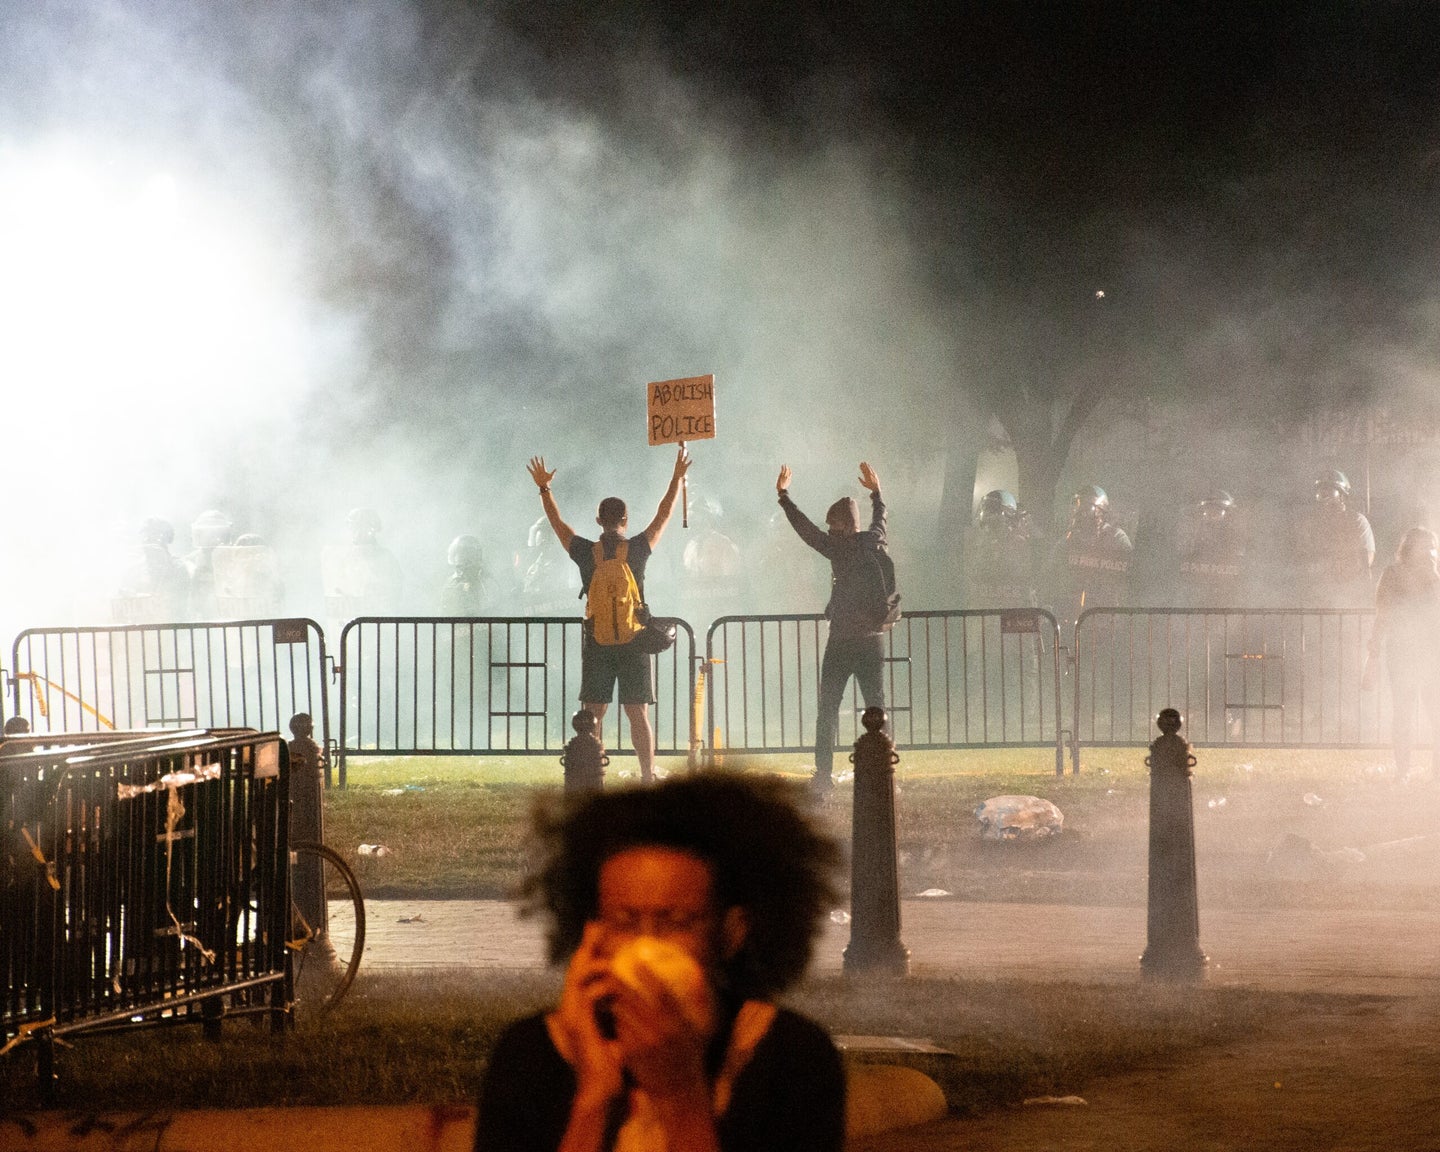 Protesters in Washington, D.C. faced off with canisters of tear gas at the end of May.